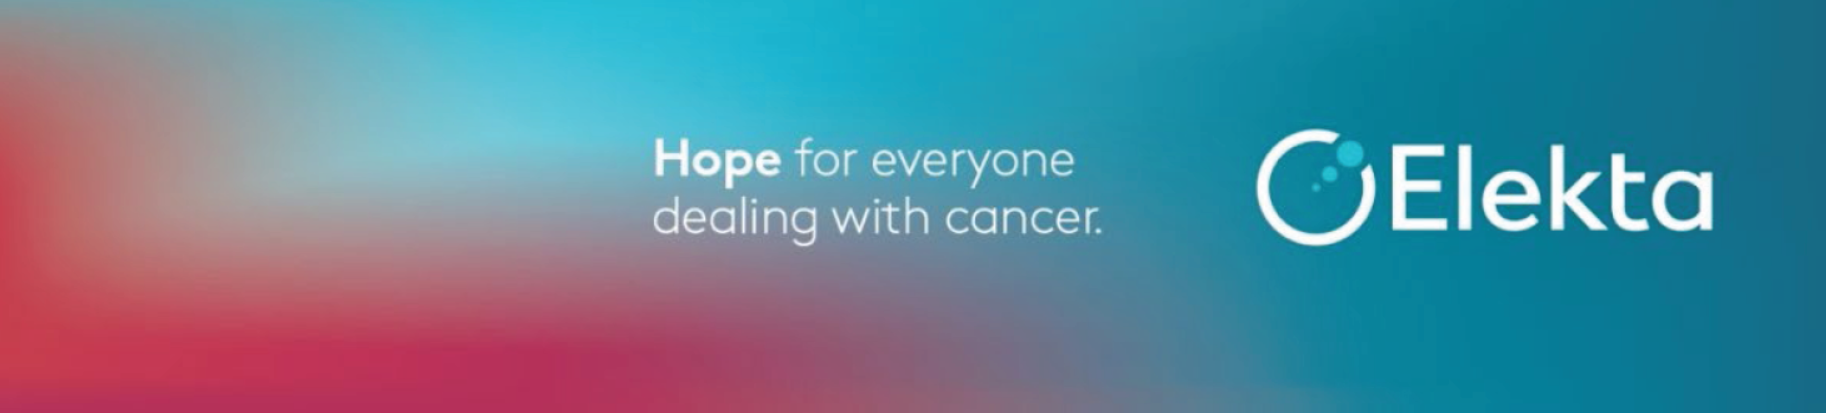 Hope for everyone dealing with cancer Elekta